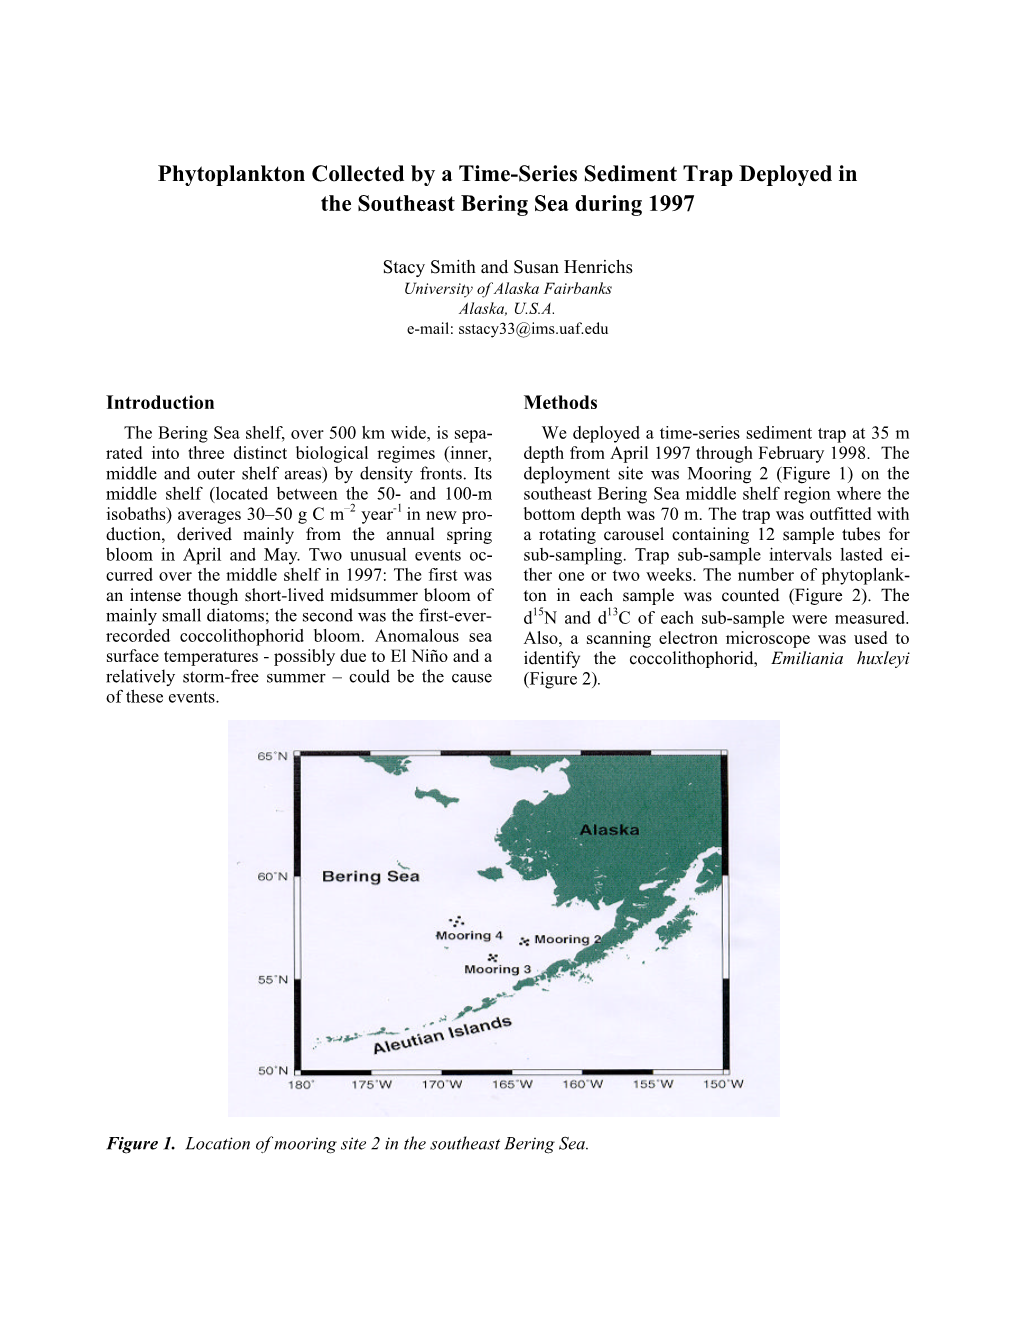 Phytoplankton Collected by a Time-Series Sediment Trap Deployed in the Southeast Bering Sea During 1997